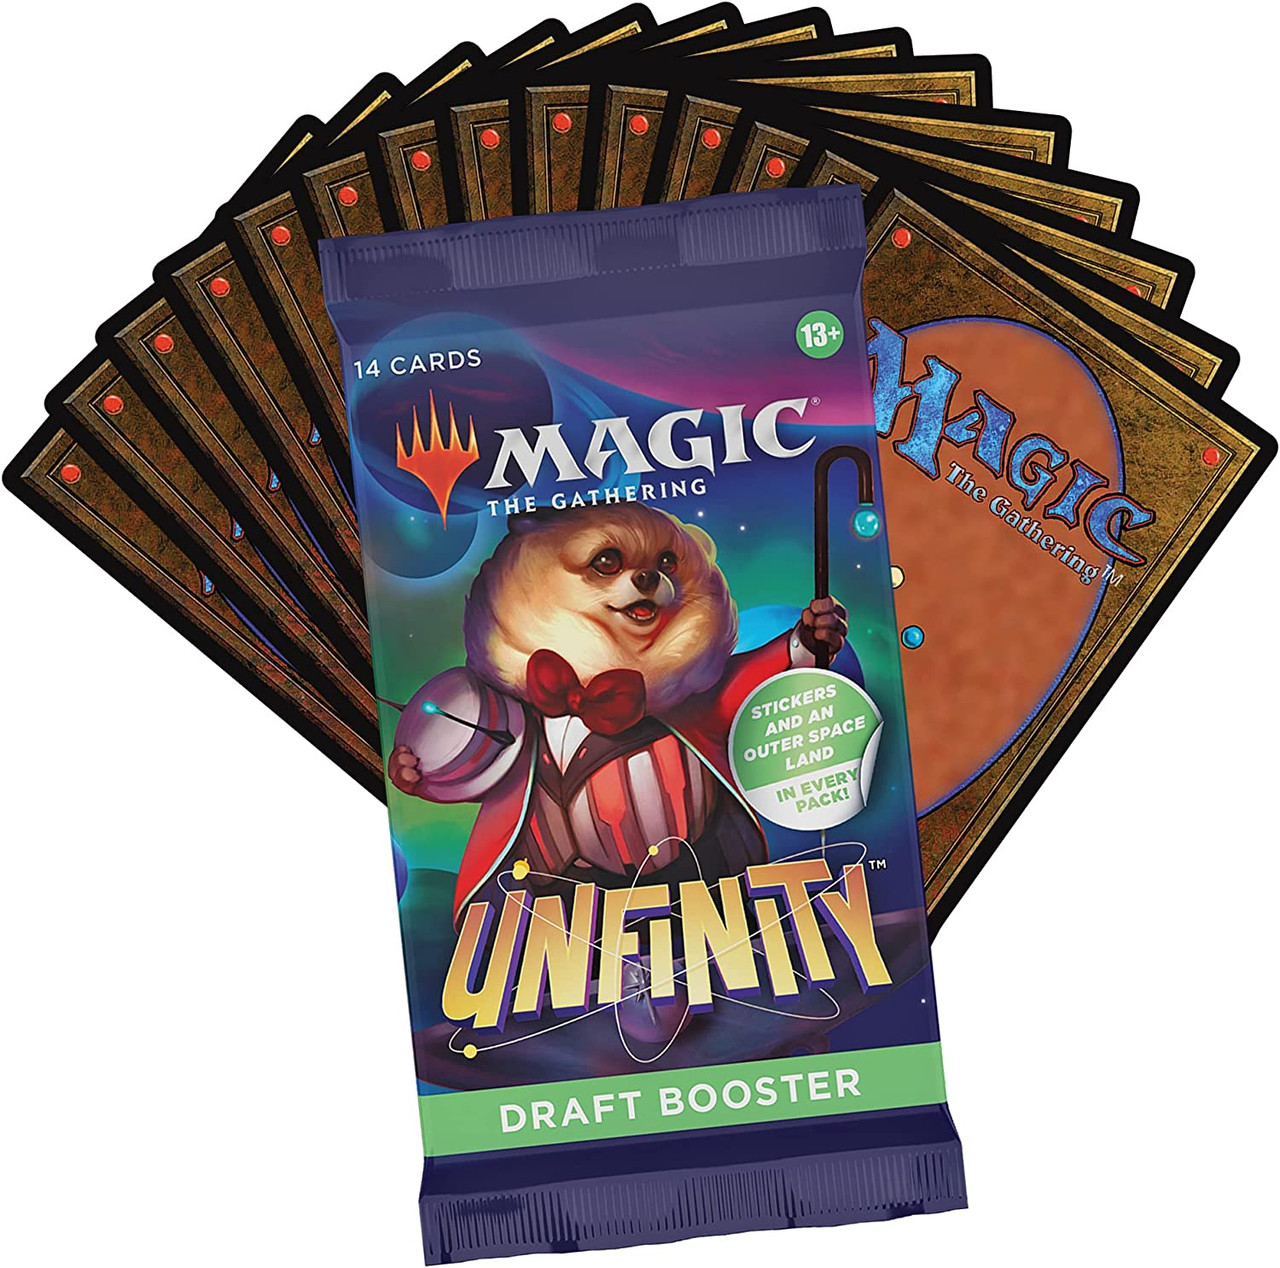 Magic the Gathering CCG: Unfinity Draft Booster